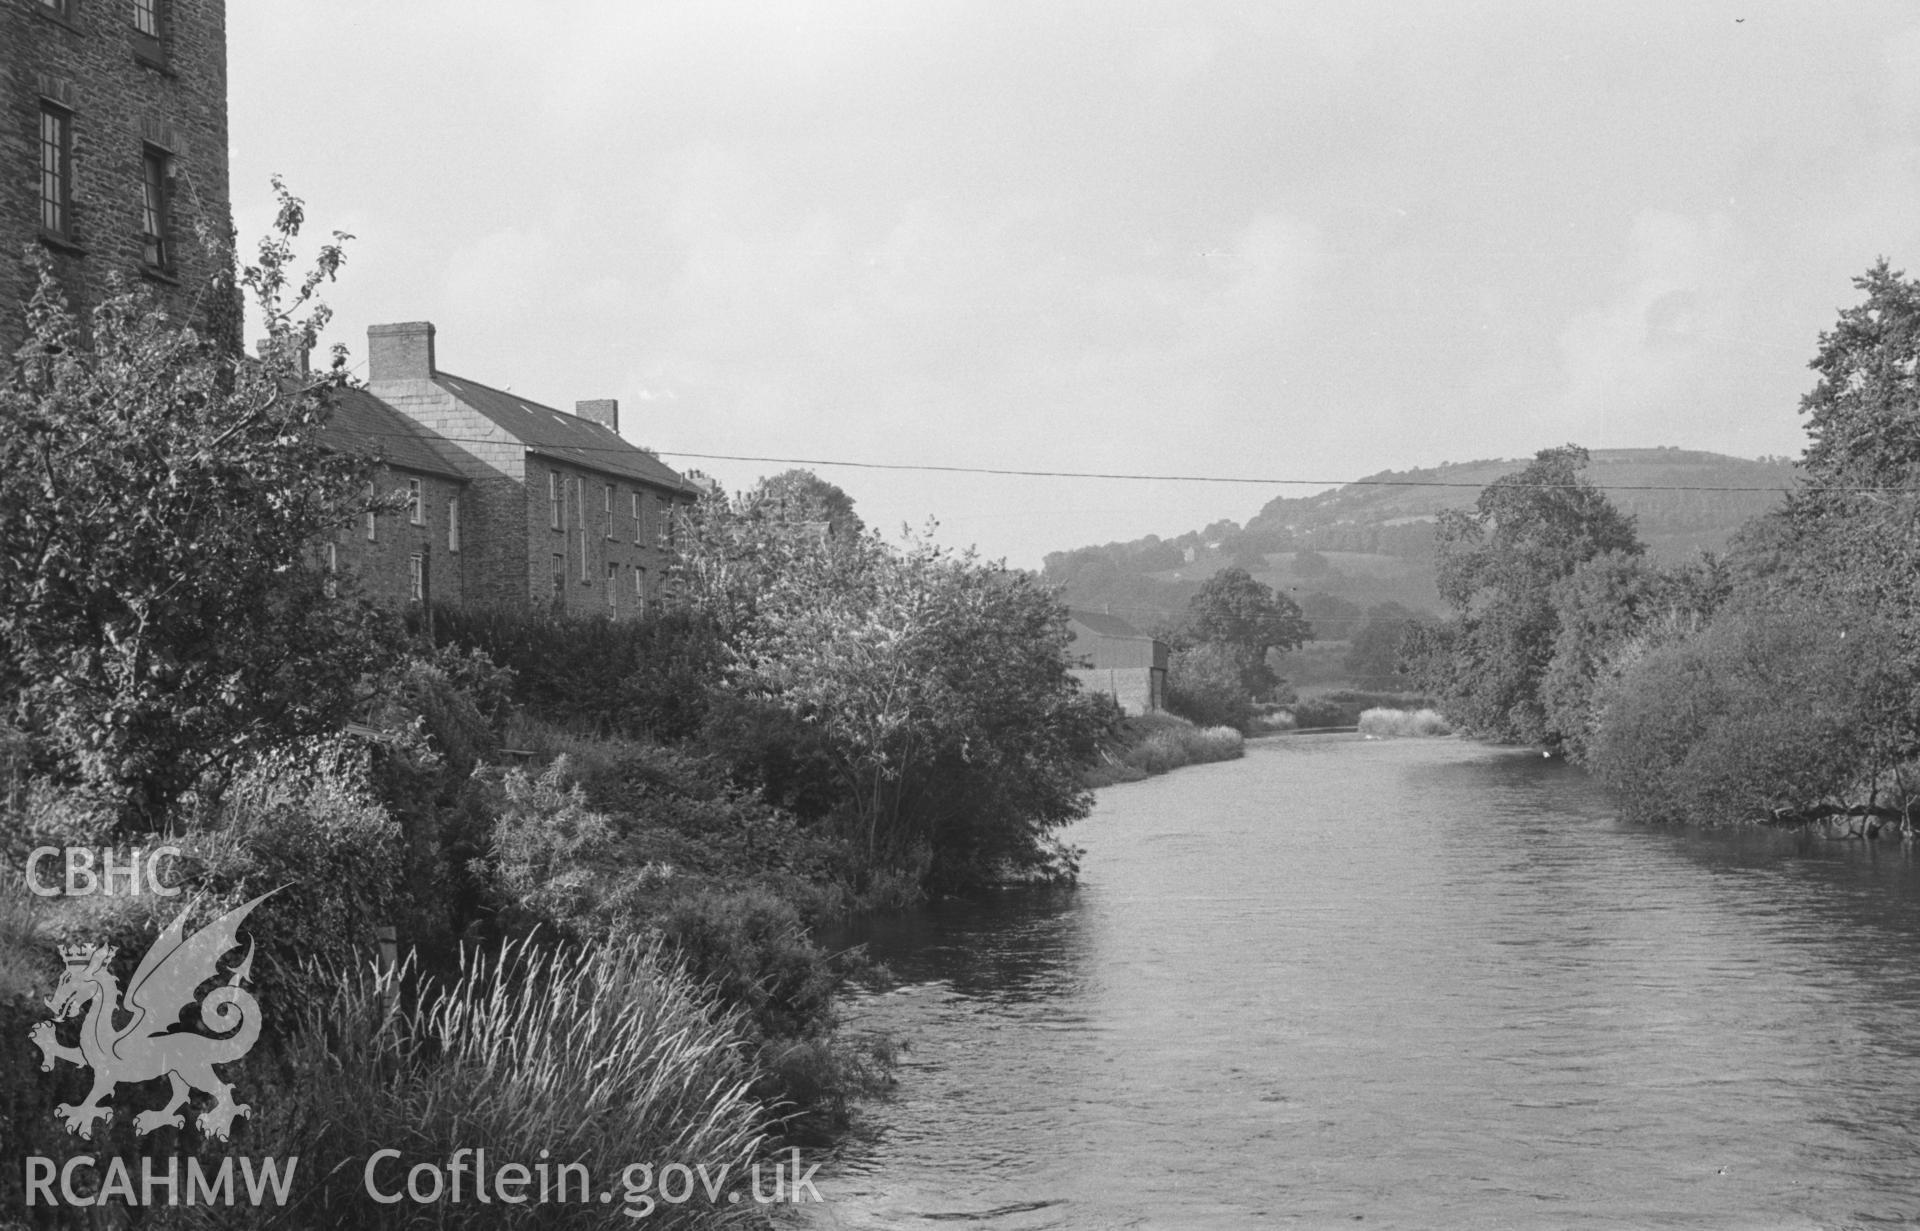 Digital copy of a black and white negative showing view up the river Teifi from the back of the Porth Hotel, Llandysul. Pencoed-y-Foel on skyline on right. Photographed by Arthur O. Chater in August 1965 from Grid Reference SN 4190 4076, looking north.